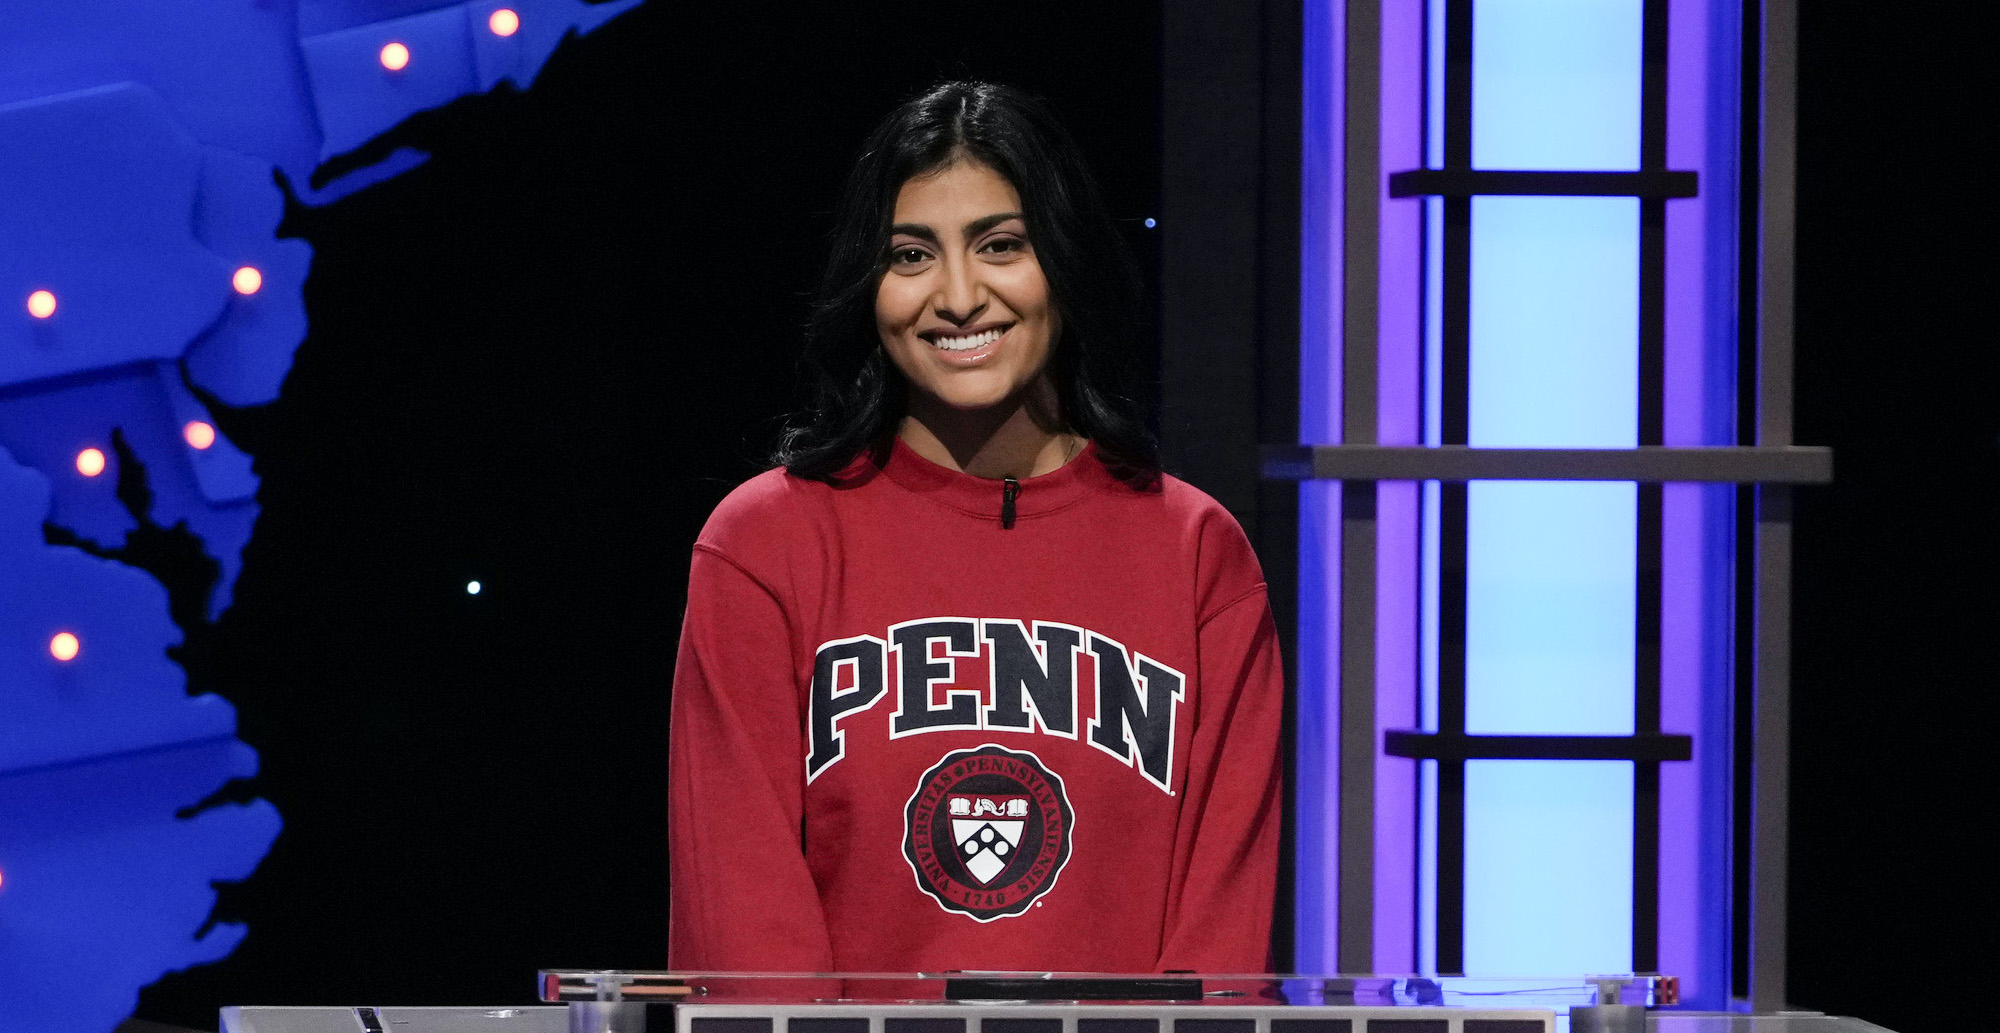 a smiling student wearing a Penn sweatshirt stands in front of a game show platform